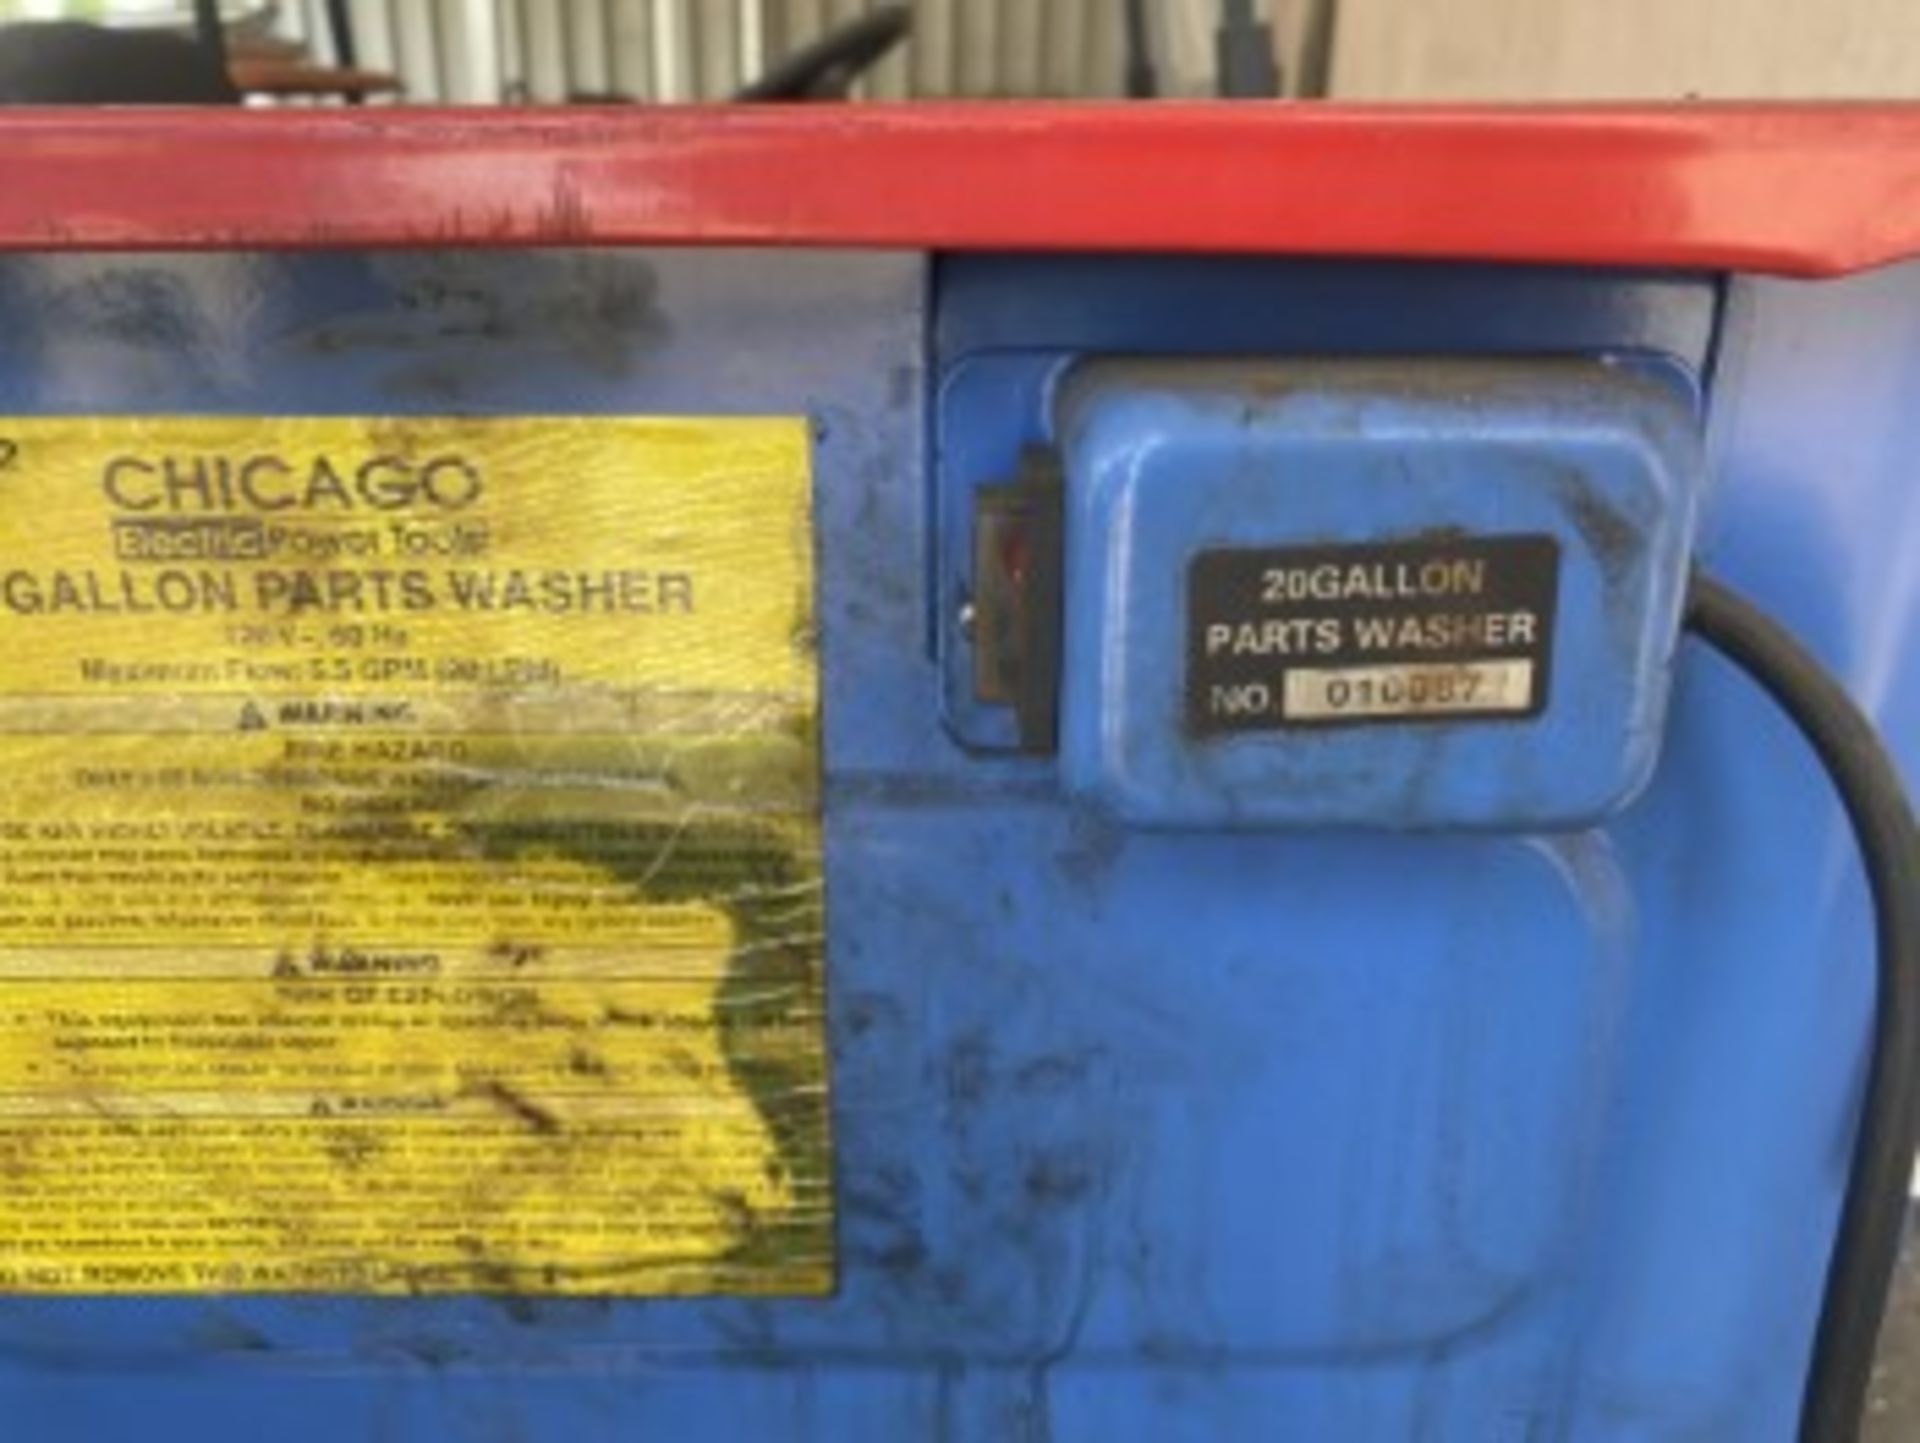 CHICAGO BLUE / RED PARTS WASHER - 20 GALLON - Image 5 of 5